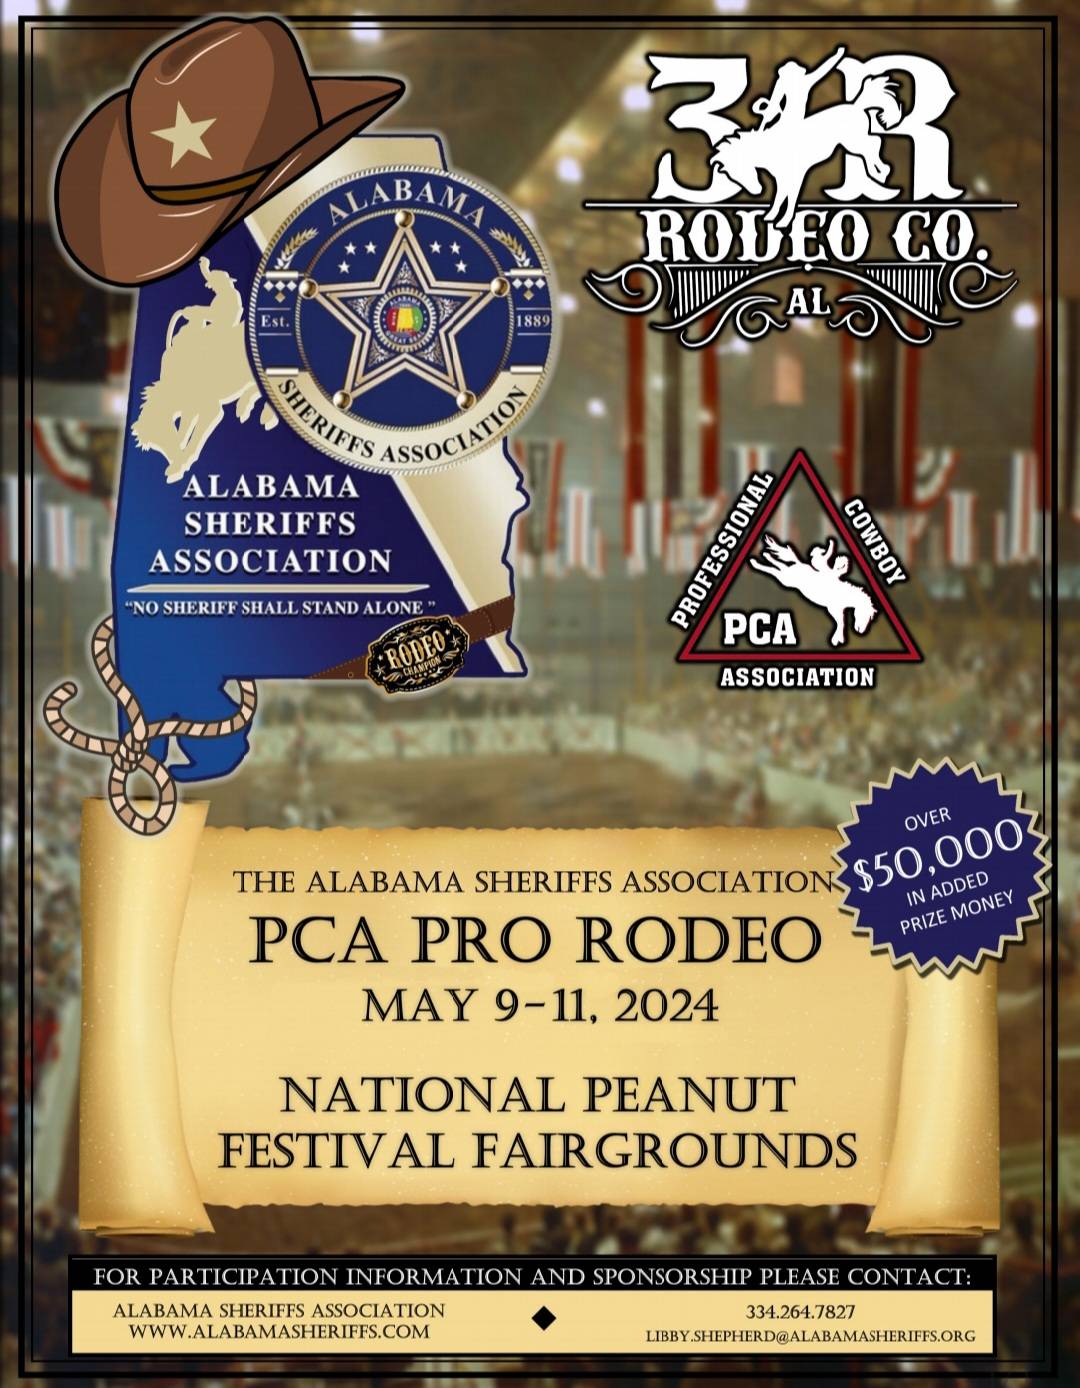 Events 3R Rodeo Company